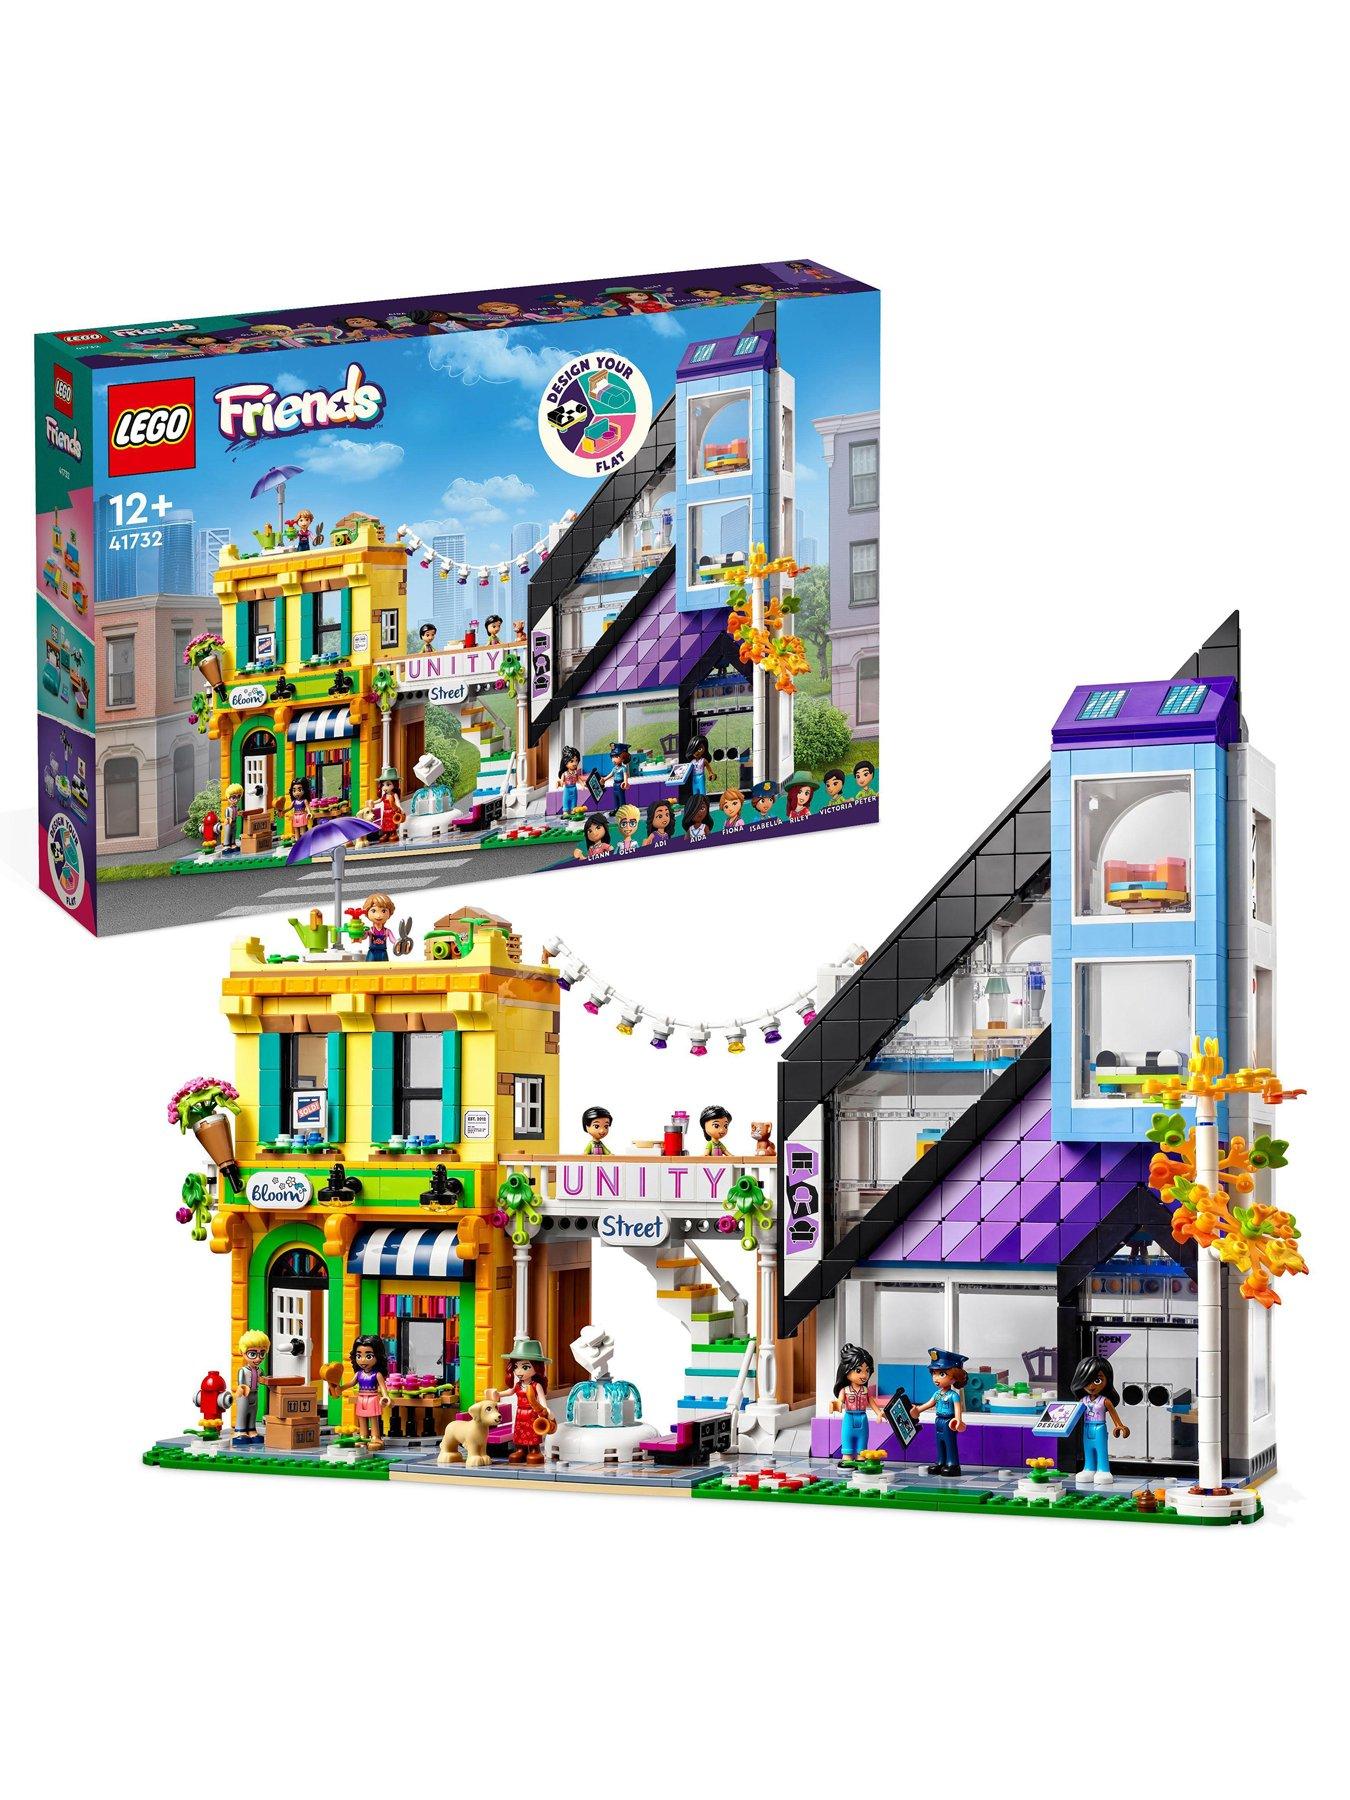 LEGO Downtown Flower and 41732 | Very.co.uk